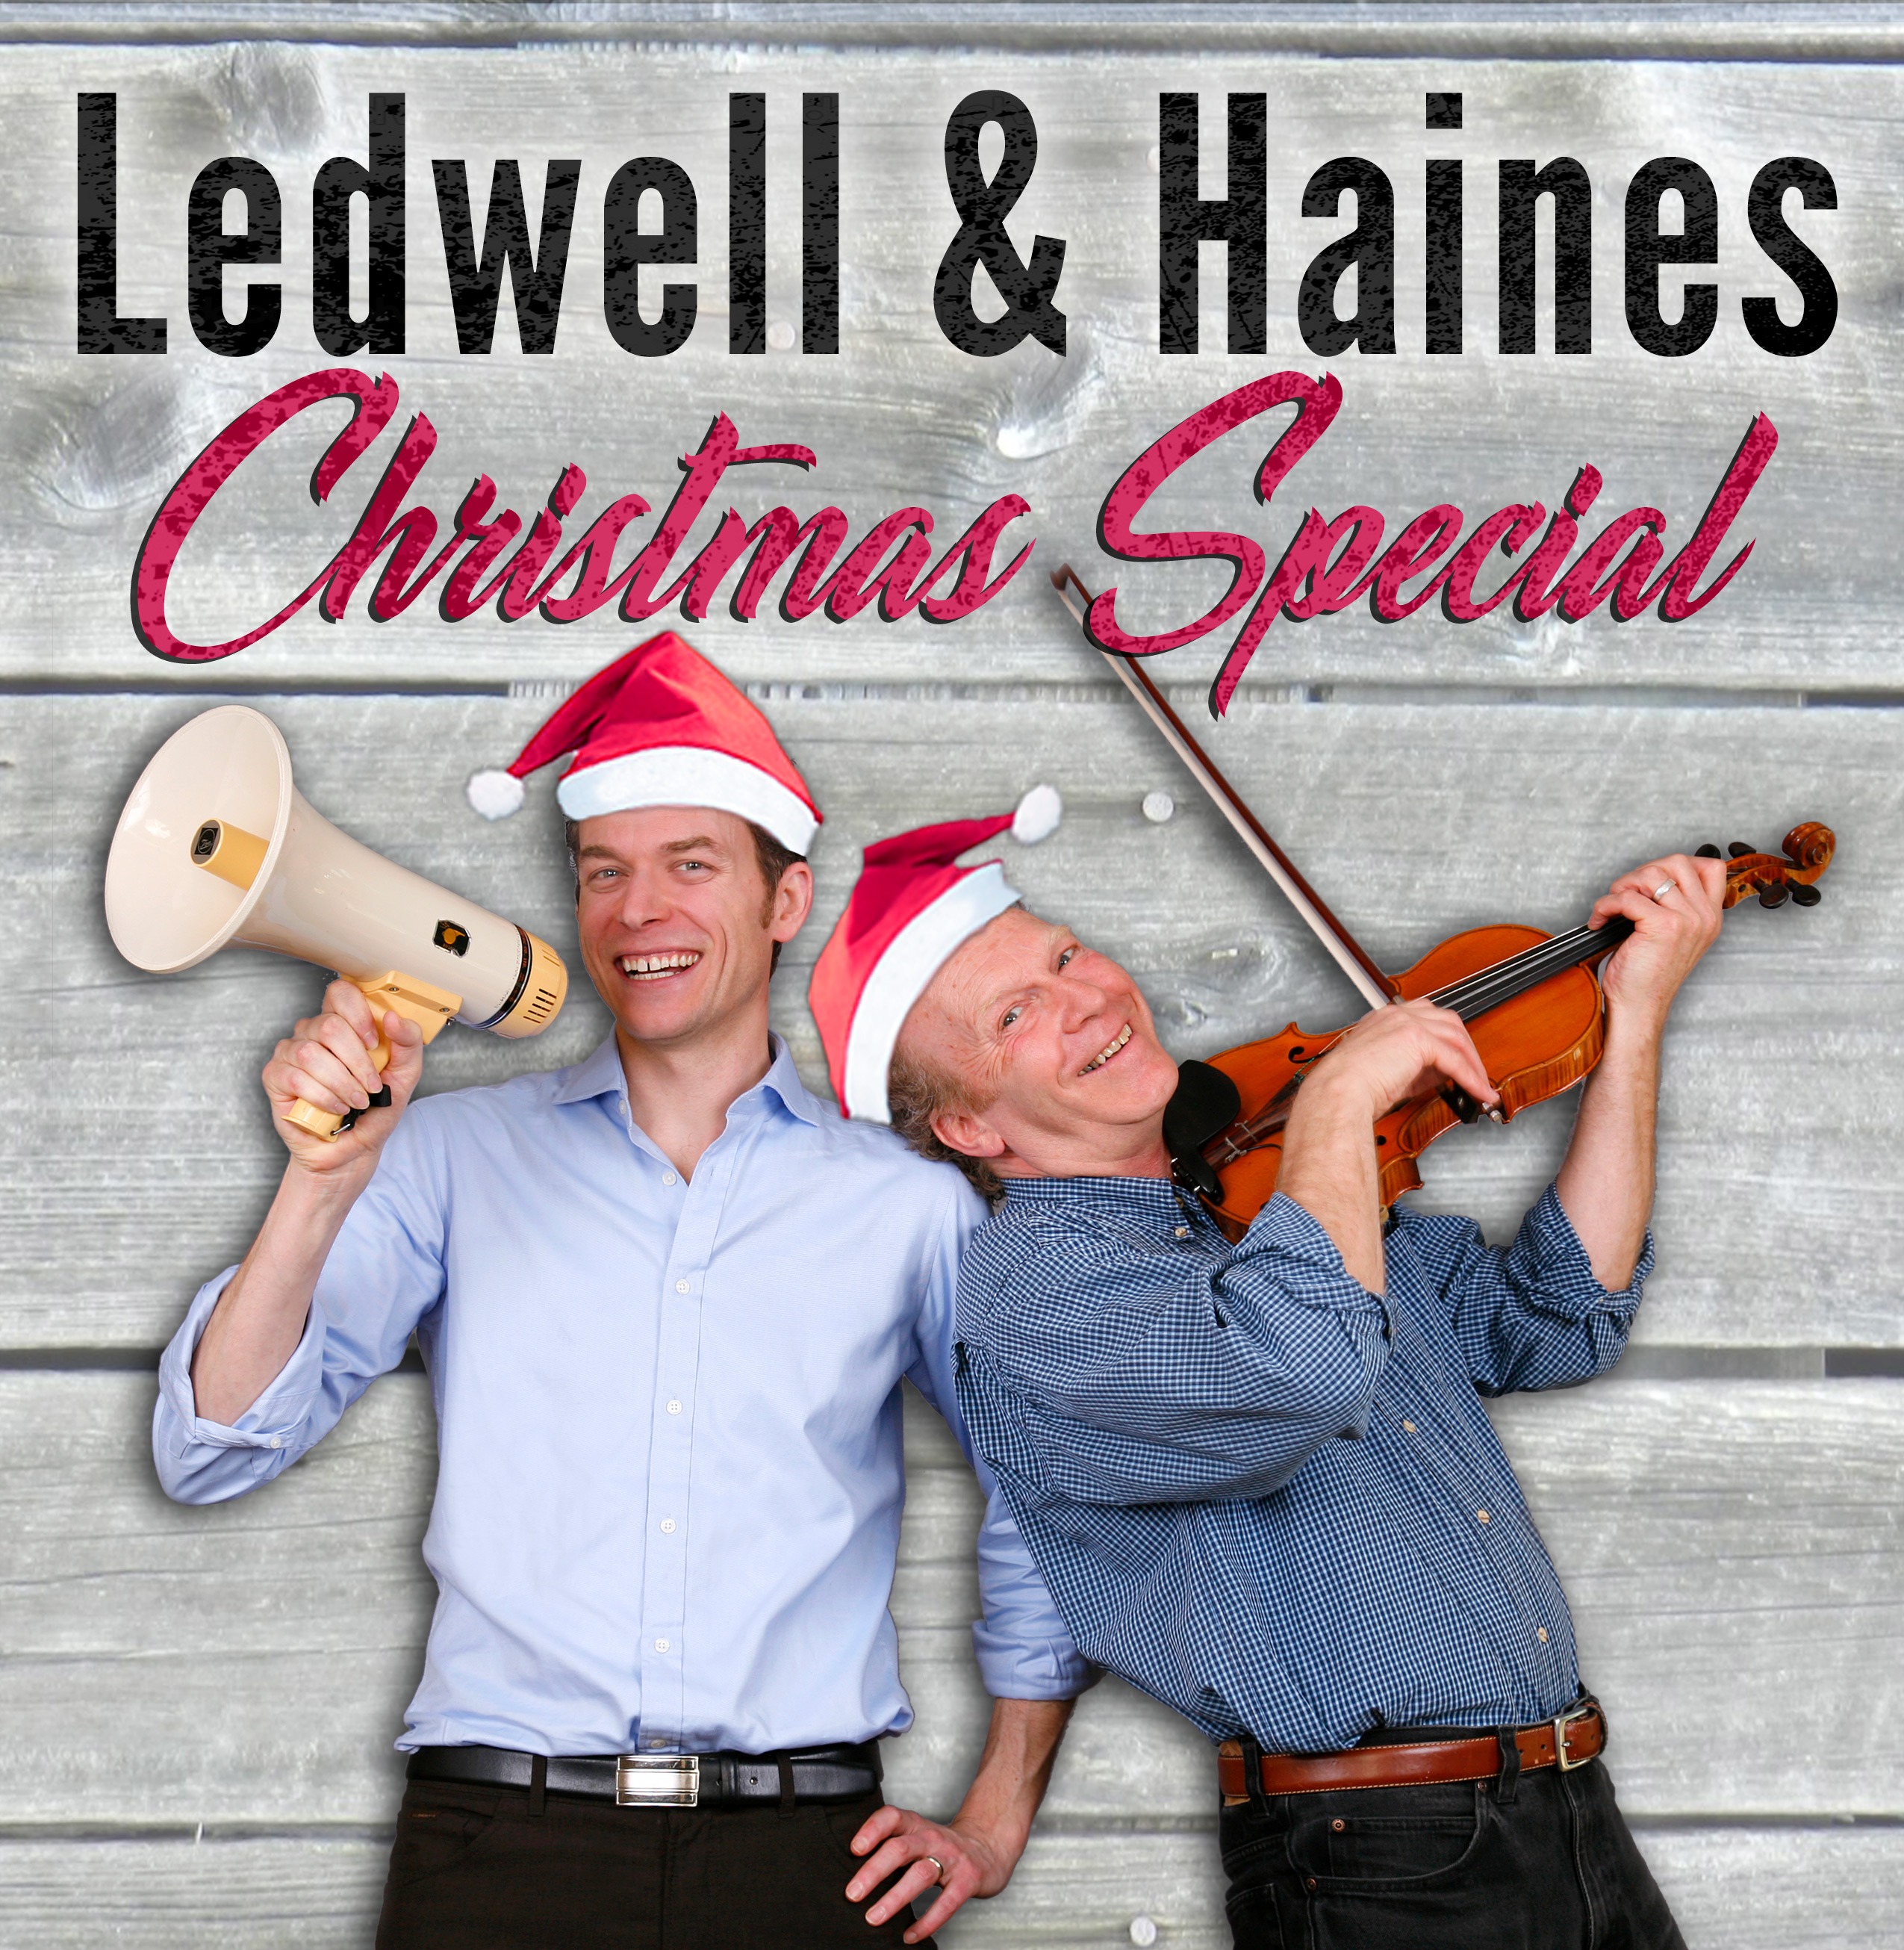 Ledwell & Haines Christmas Special